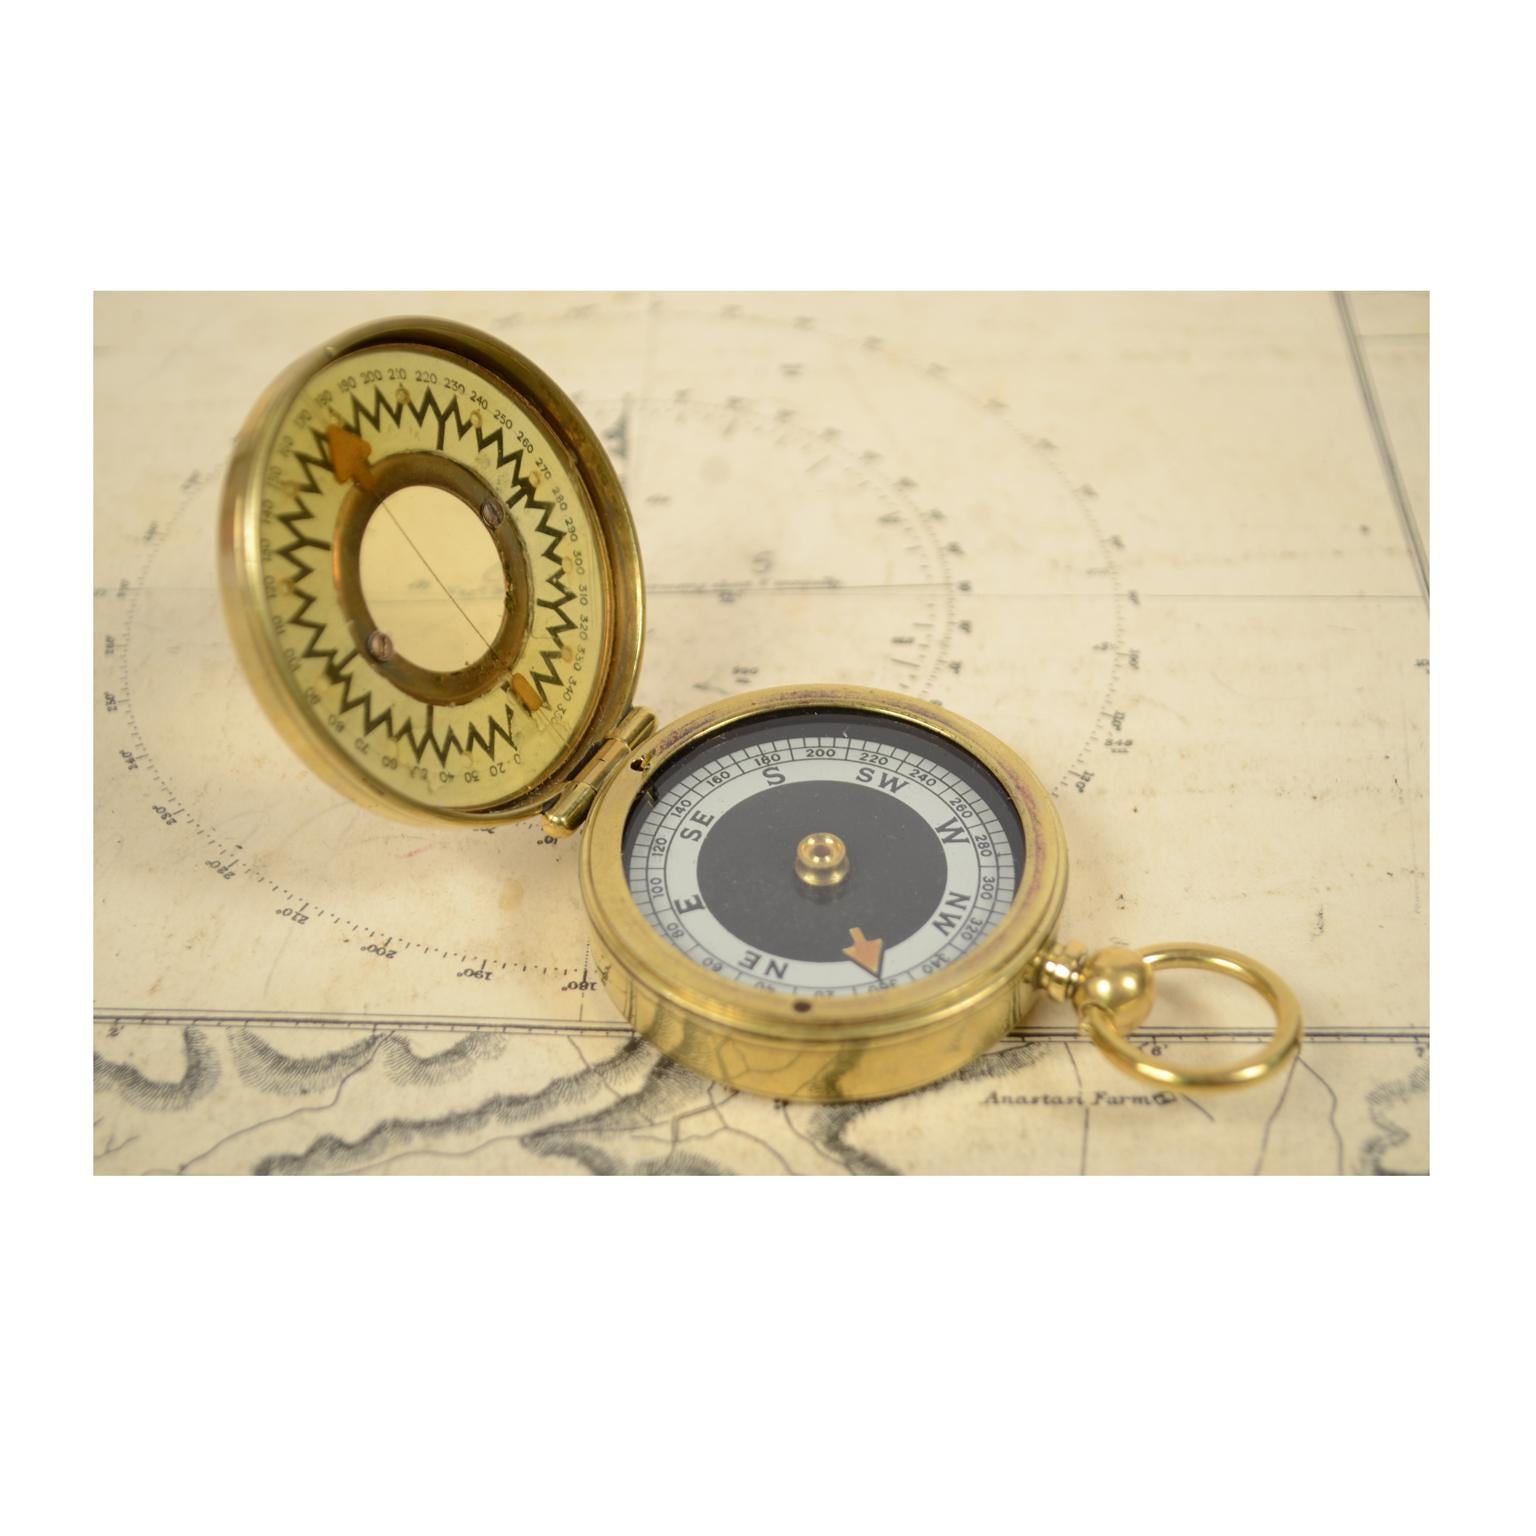 Brass nautical travel survey compass, made in 1914 circa, signed The Magnapole; small compass used away from magnetic fields to check the ship's course. The compass is complete with a goniometric circle and the block of compass card. Measure: